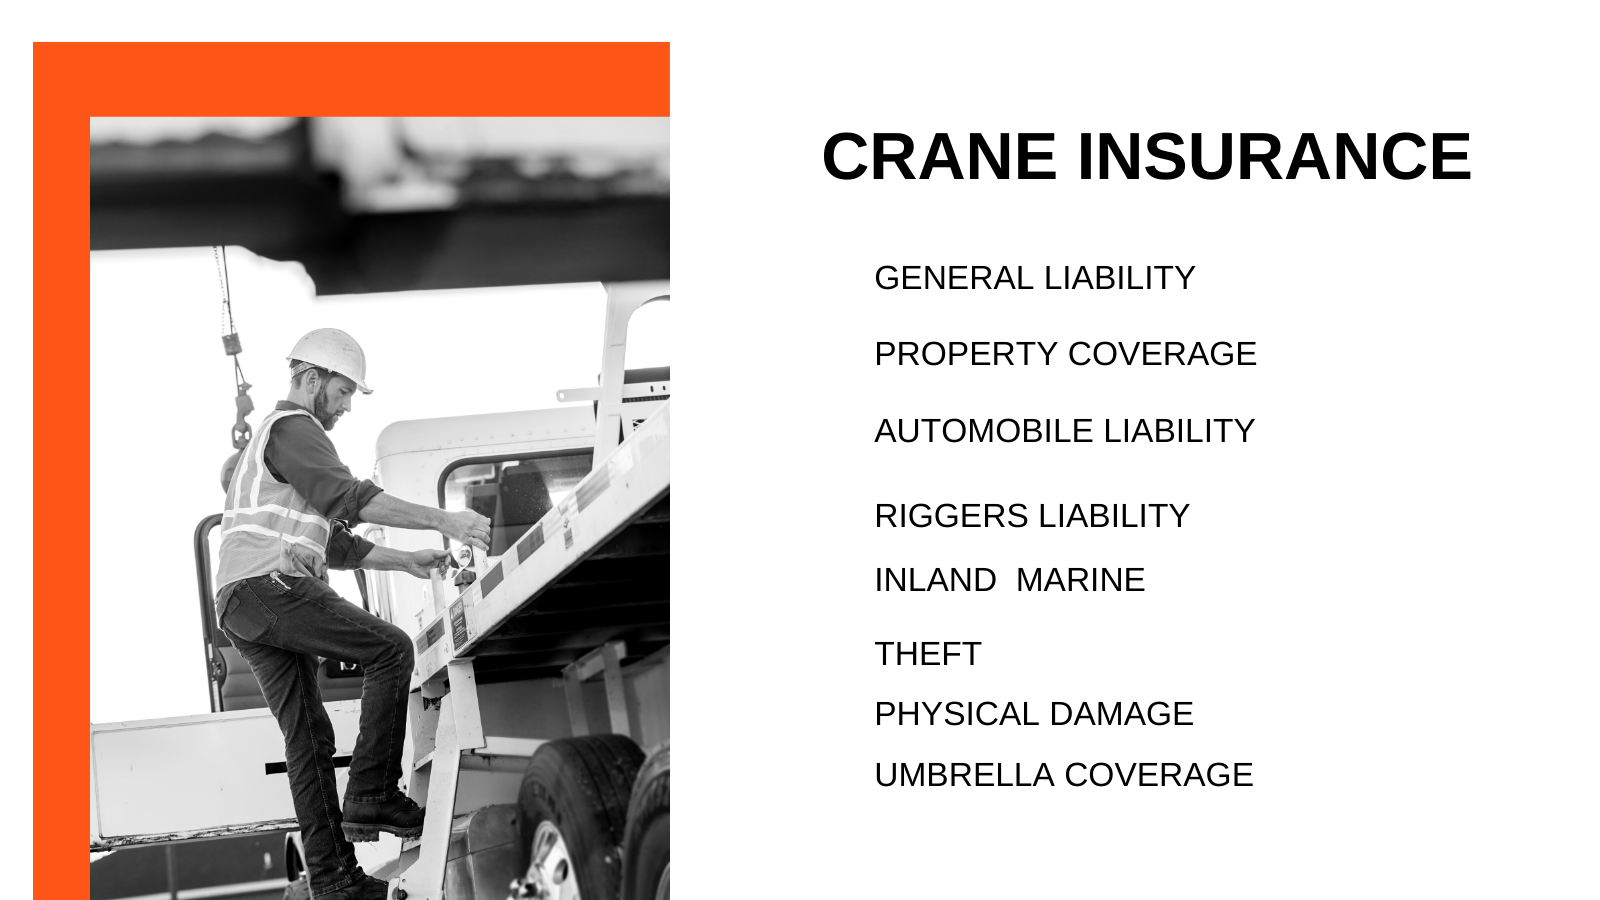 Crane Insurance Coverage options general property automobile riggers inland theft physical